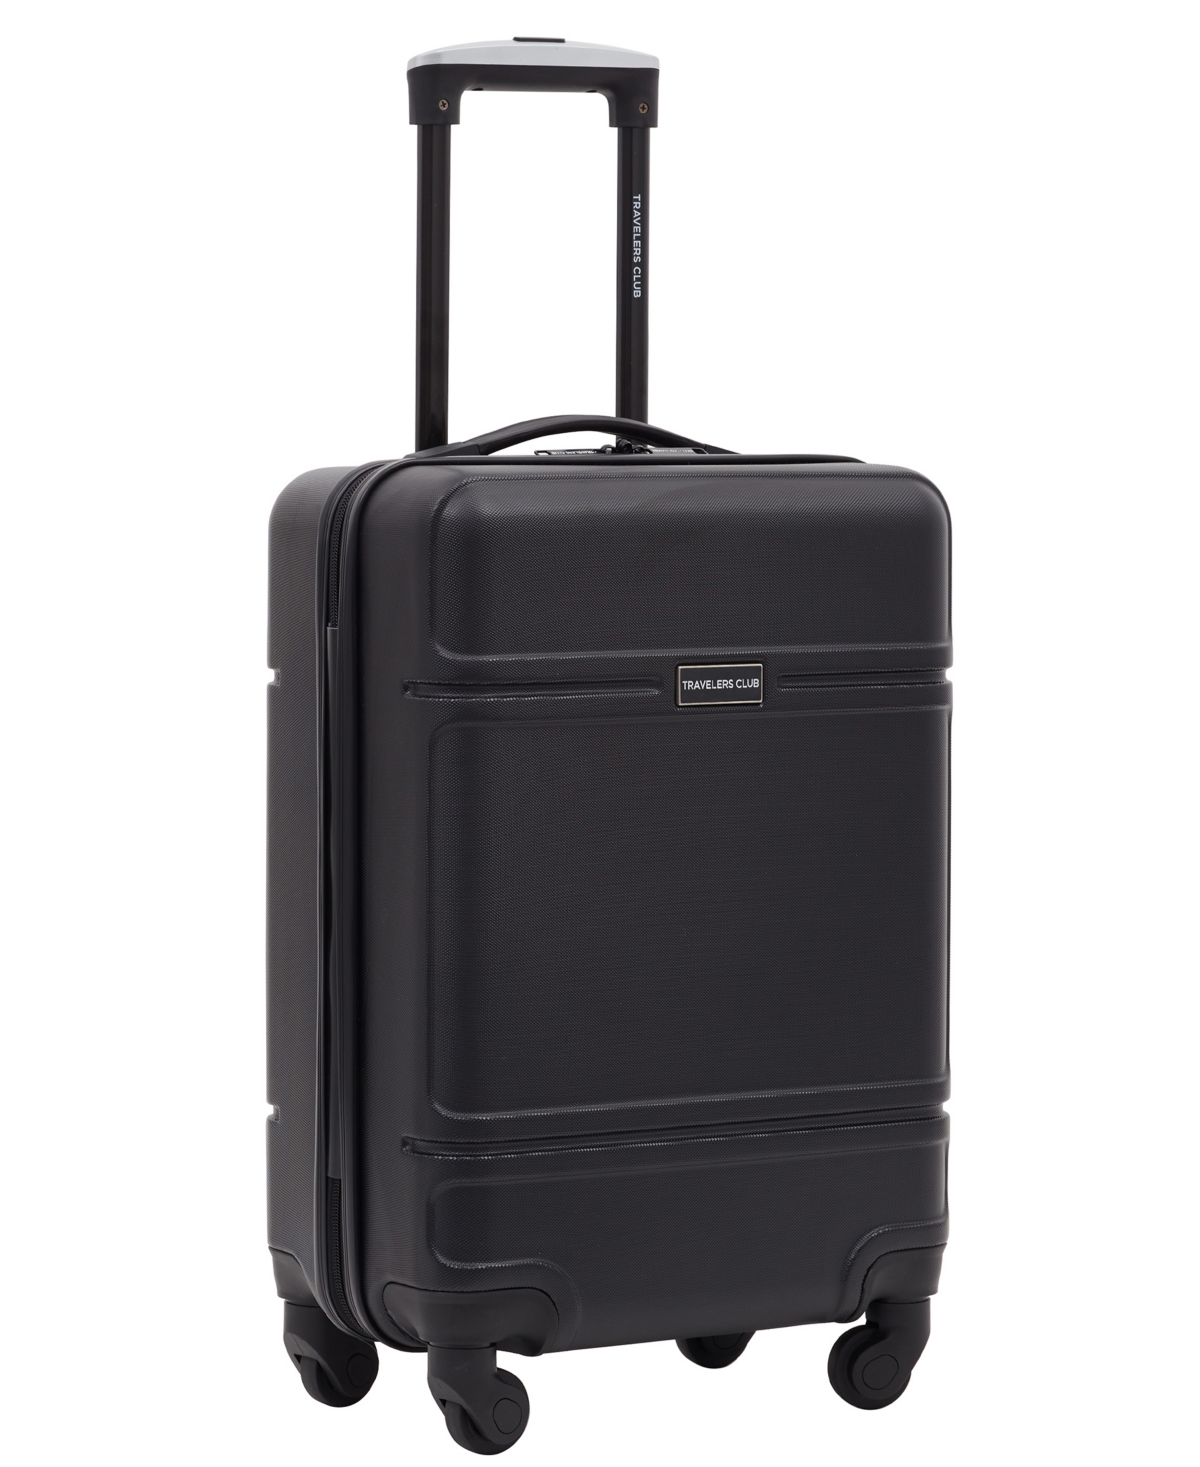 Skyline Collection 20" Rolling Carry-On with 360 Degree 4-Wheel System - Black